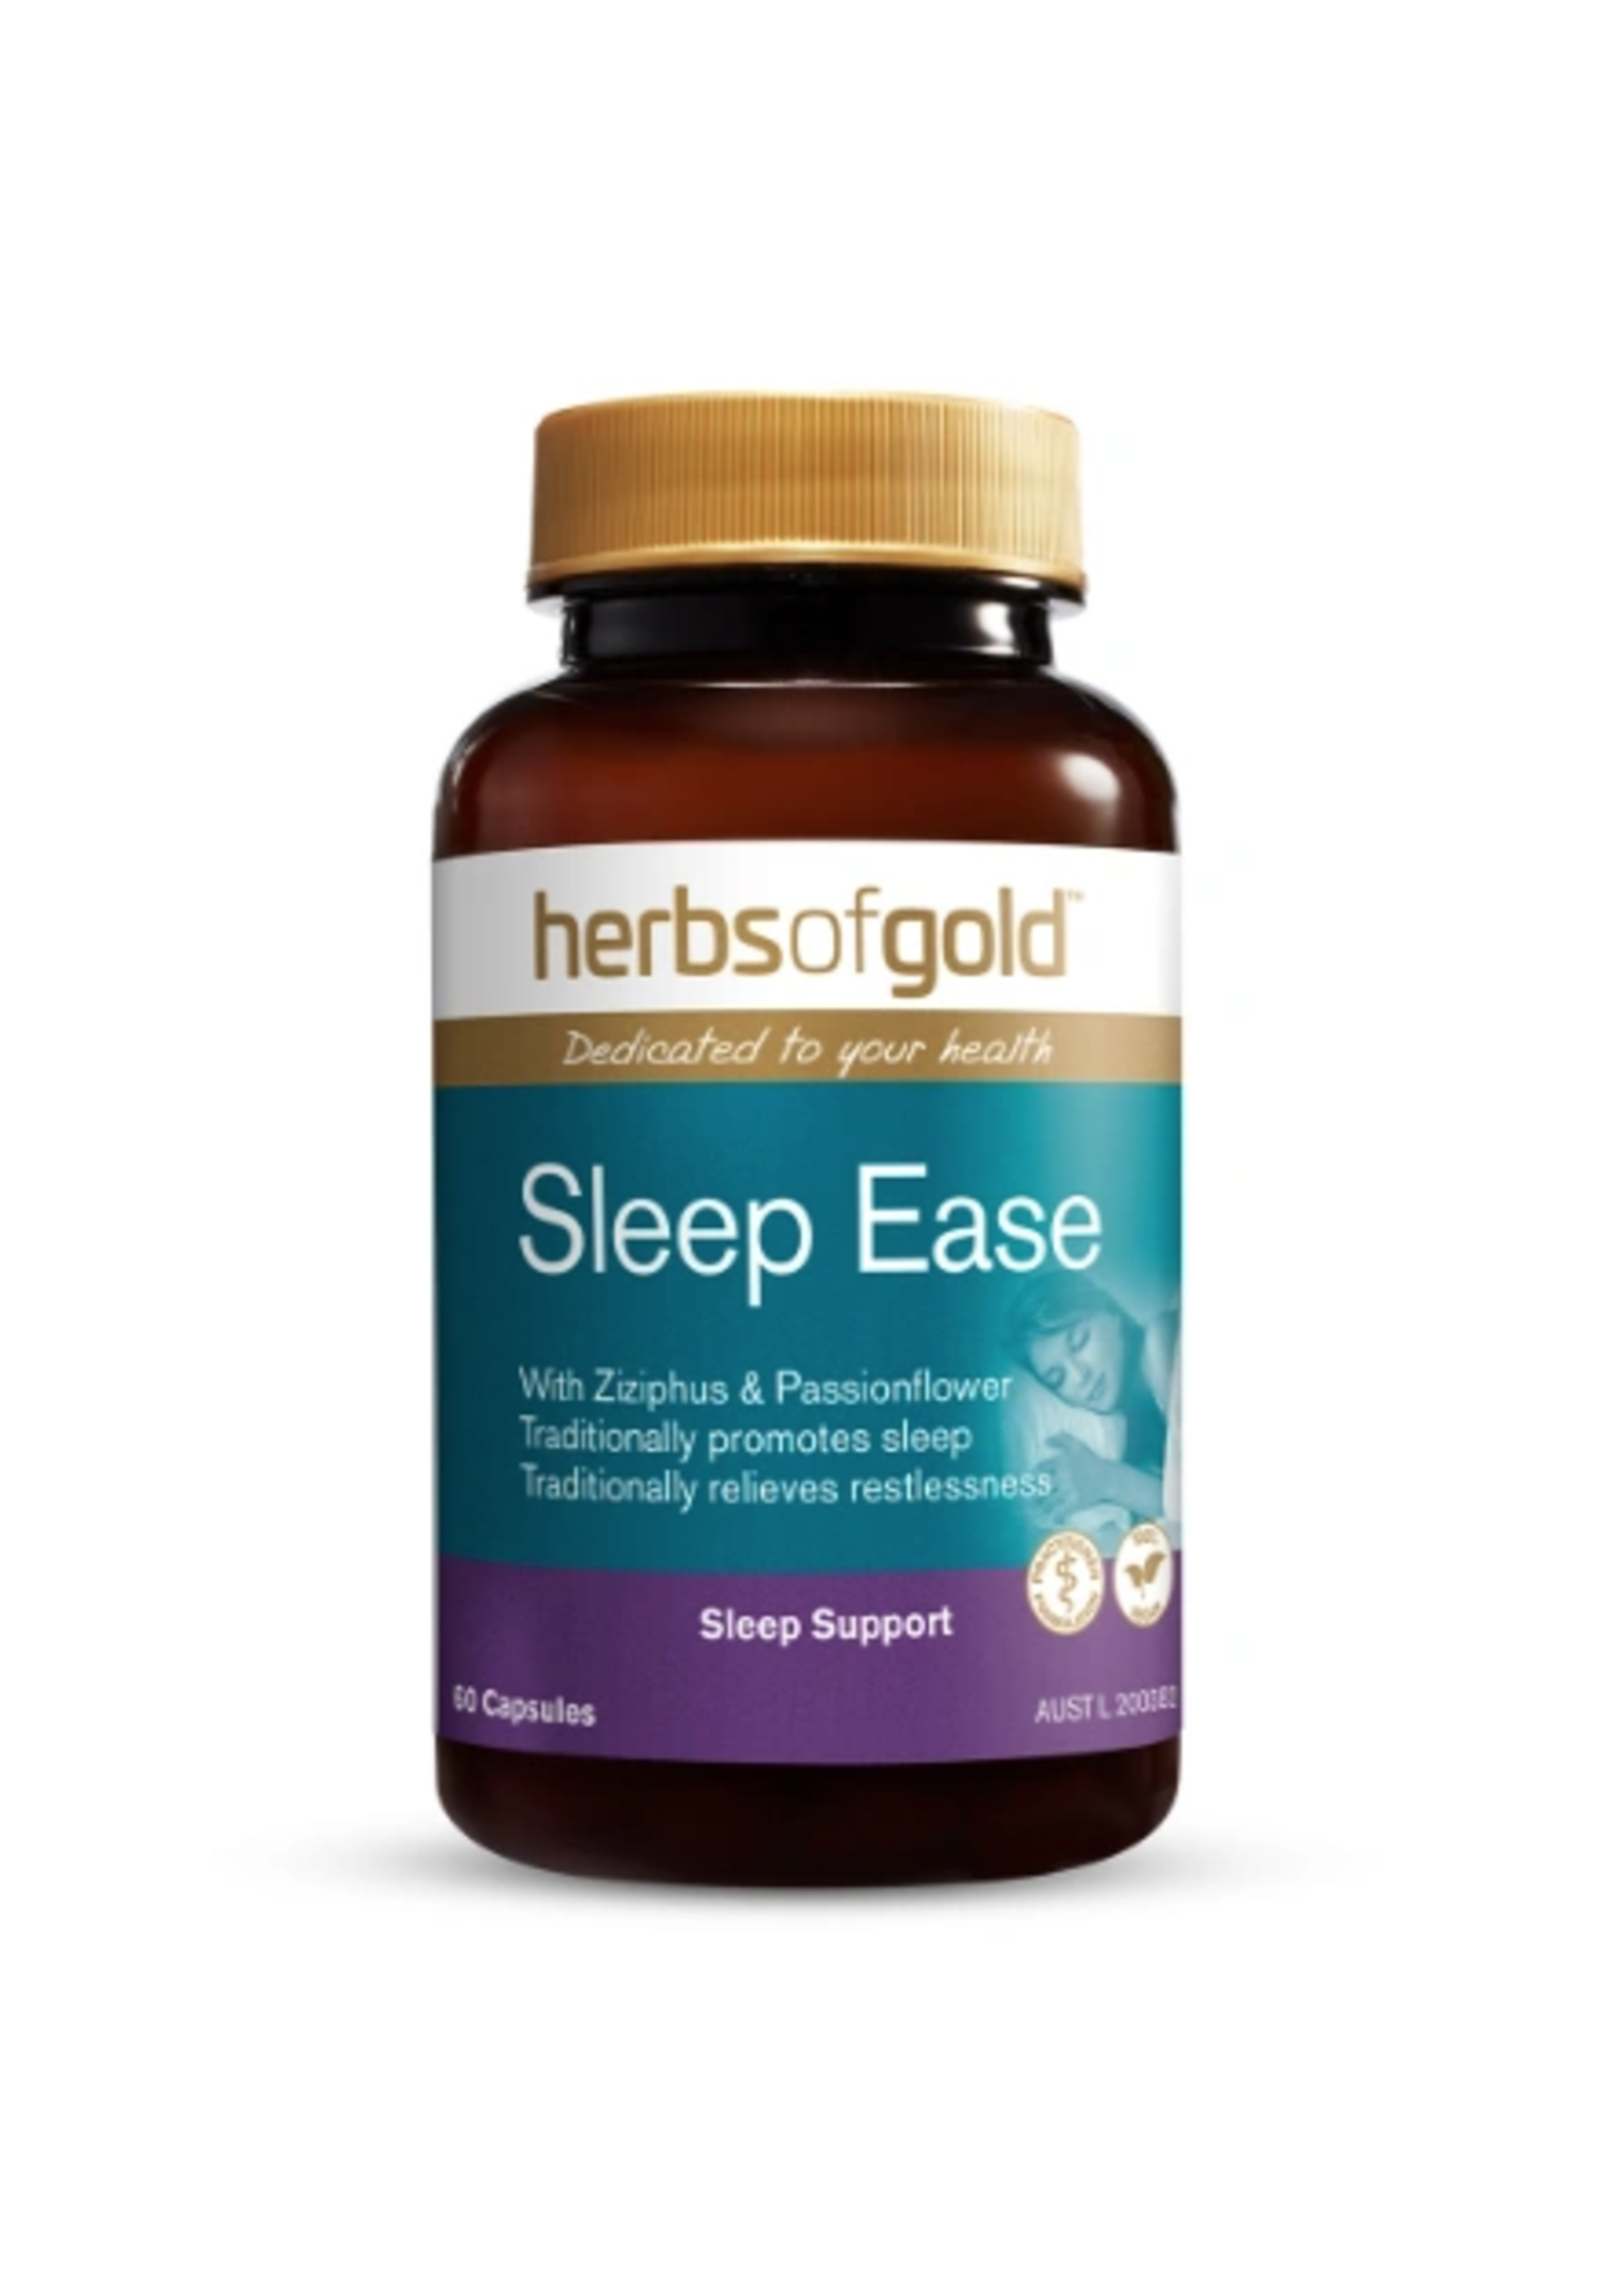 Herbs of Gold Herbs of Gold Sleep Ease 60 caps (SEPCIAL ORDER ONLY)